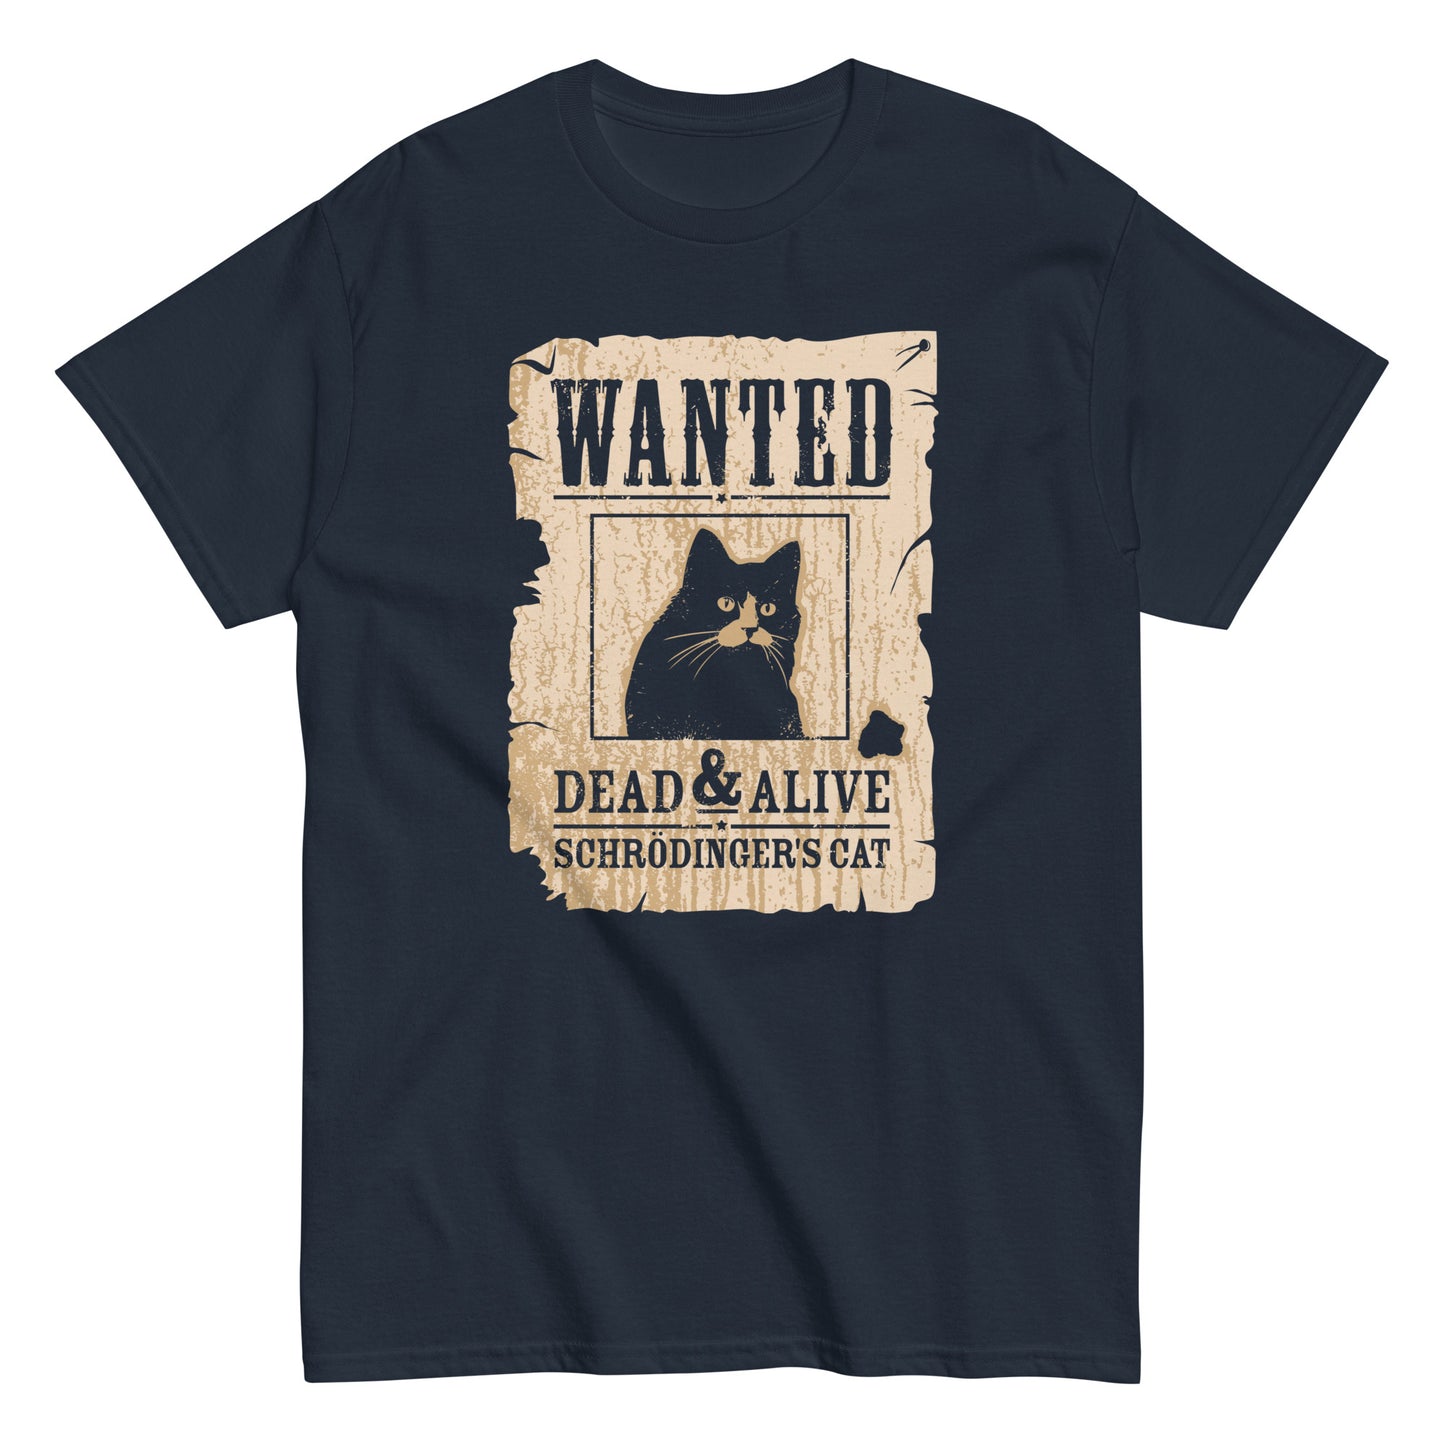 Wanted Dead And Alive Men's Classic Tee